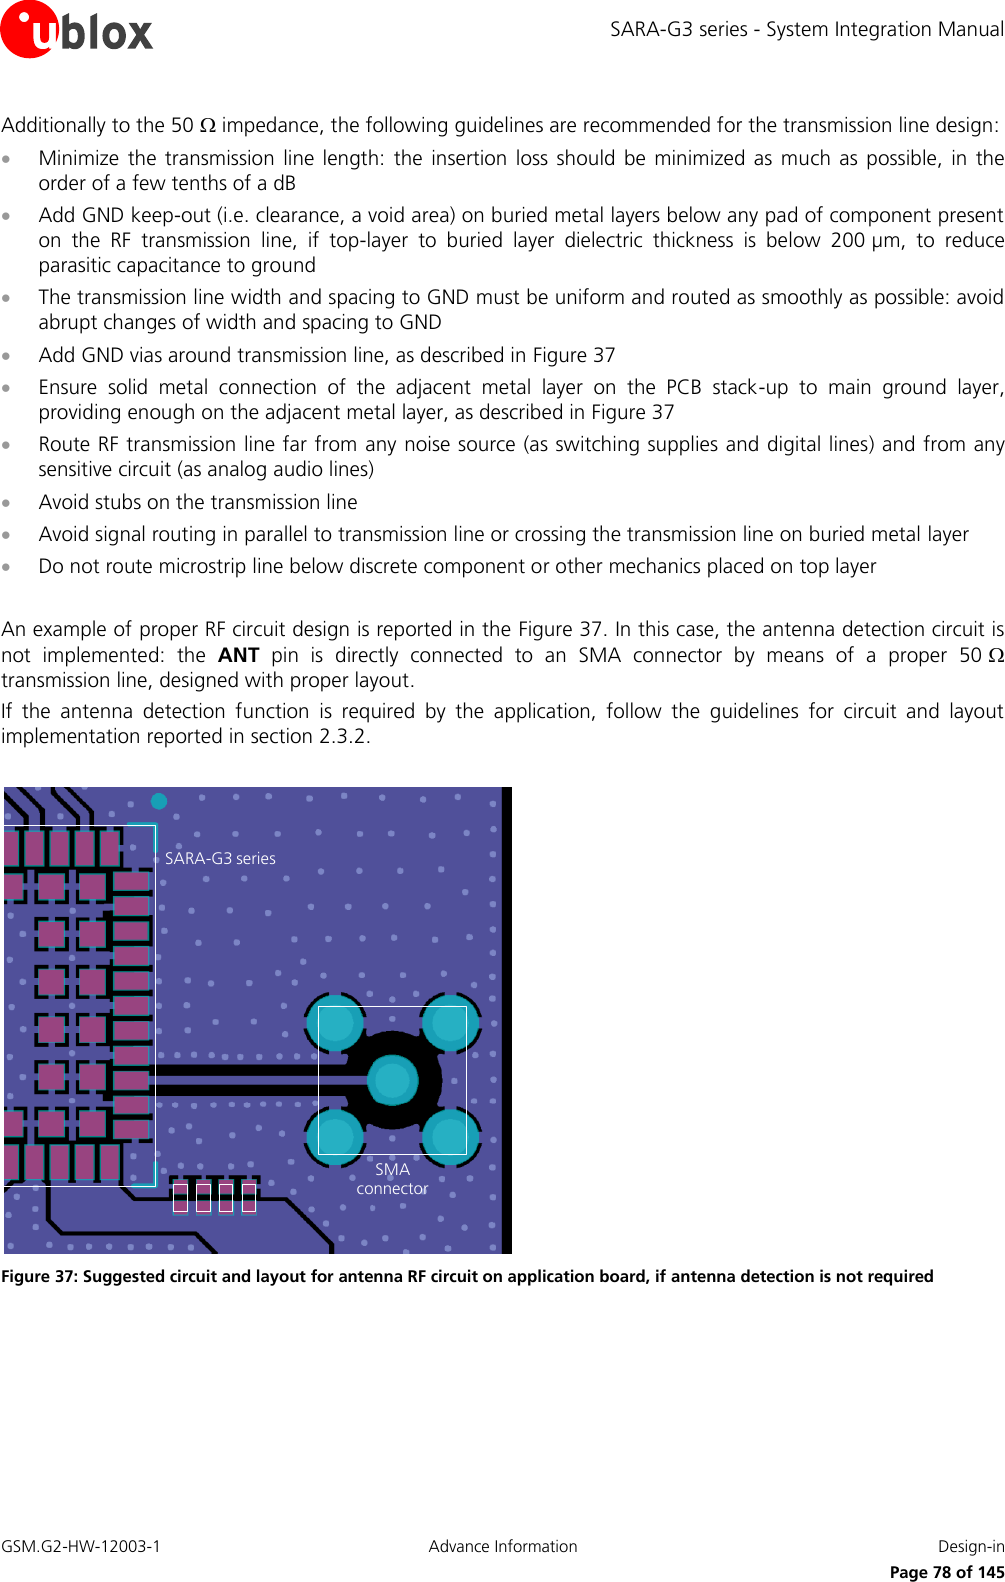 SARA-G3 series - System Integration Manual GSM.G2-HW-12003-1  Advance Information  Design-in     Page 78 of 145 Additionally to the 50  impedance, the following guidelines are recommended for the transmission line design:  Minimize  the  transmission  line  length: the  insertion  loss  should  be minimized  as  much  as  possible,  in  the order of a few tenths of a dB  Add GND keep-out (i.e. clearance, a void area) on buried metal layers below any pad of component present on  the  RF  transmission  line,  if  top-layer  to  buried  layer  dielectric  thickness  is  below  200 µm,  to  reduce parasitic capacitance to ground  The transmission line width and spacing to GND must be uniform and routed as smoothly as possible: avoid abrupt changes of width and spacing to GND  Add GND vias around transmission line, as described in Figure 37  Ensure  solid  metal  connection  of  the  adjacent  metal  layer  on  the  PCB  stack-up  to  main  ground  layer, providing enough on the adjacent metal layer, as described in Figure 37  Route RF transmission line far from any noise source (as switching supplies and digital lines) and from any sensitive circuit (as analog audio lines)  Avoid stubs on the transmission line  Avoid signal routing in parallel to transmission line or crossing the transmission line on buried metal layer  Do not route microstrip line below discrete component or other mechanics placed on top layer  An example of proper RF circuit design is reported in the Figure 37. In this case, the antenna detection circuit is not  implemented:  the  ANT  pin  is  directly  connected  to  an  SMA  connector  by  means  of  a  proper  50  transmission line, designed with proper layout. If  the  antenna  detection  function  is  required  by  the  application,  follow  the  guidelines  for  circuit  and  layout implementation reported in section 2.3.2.  SARA-G3 seriesSMAconnector Figure 37: Suggested circuit and layout for antenna RF circuit on application board, if antenna detection is not required  